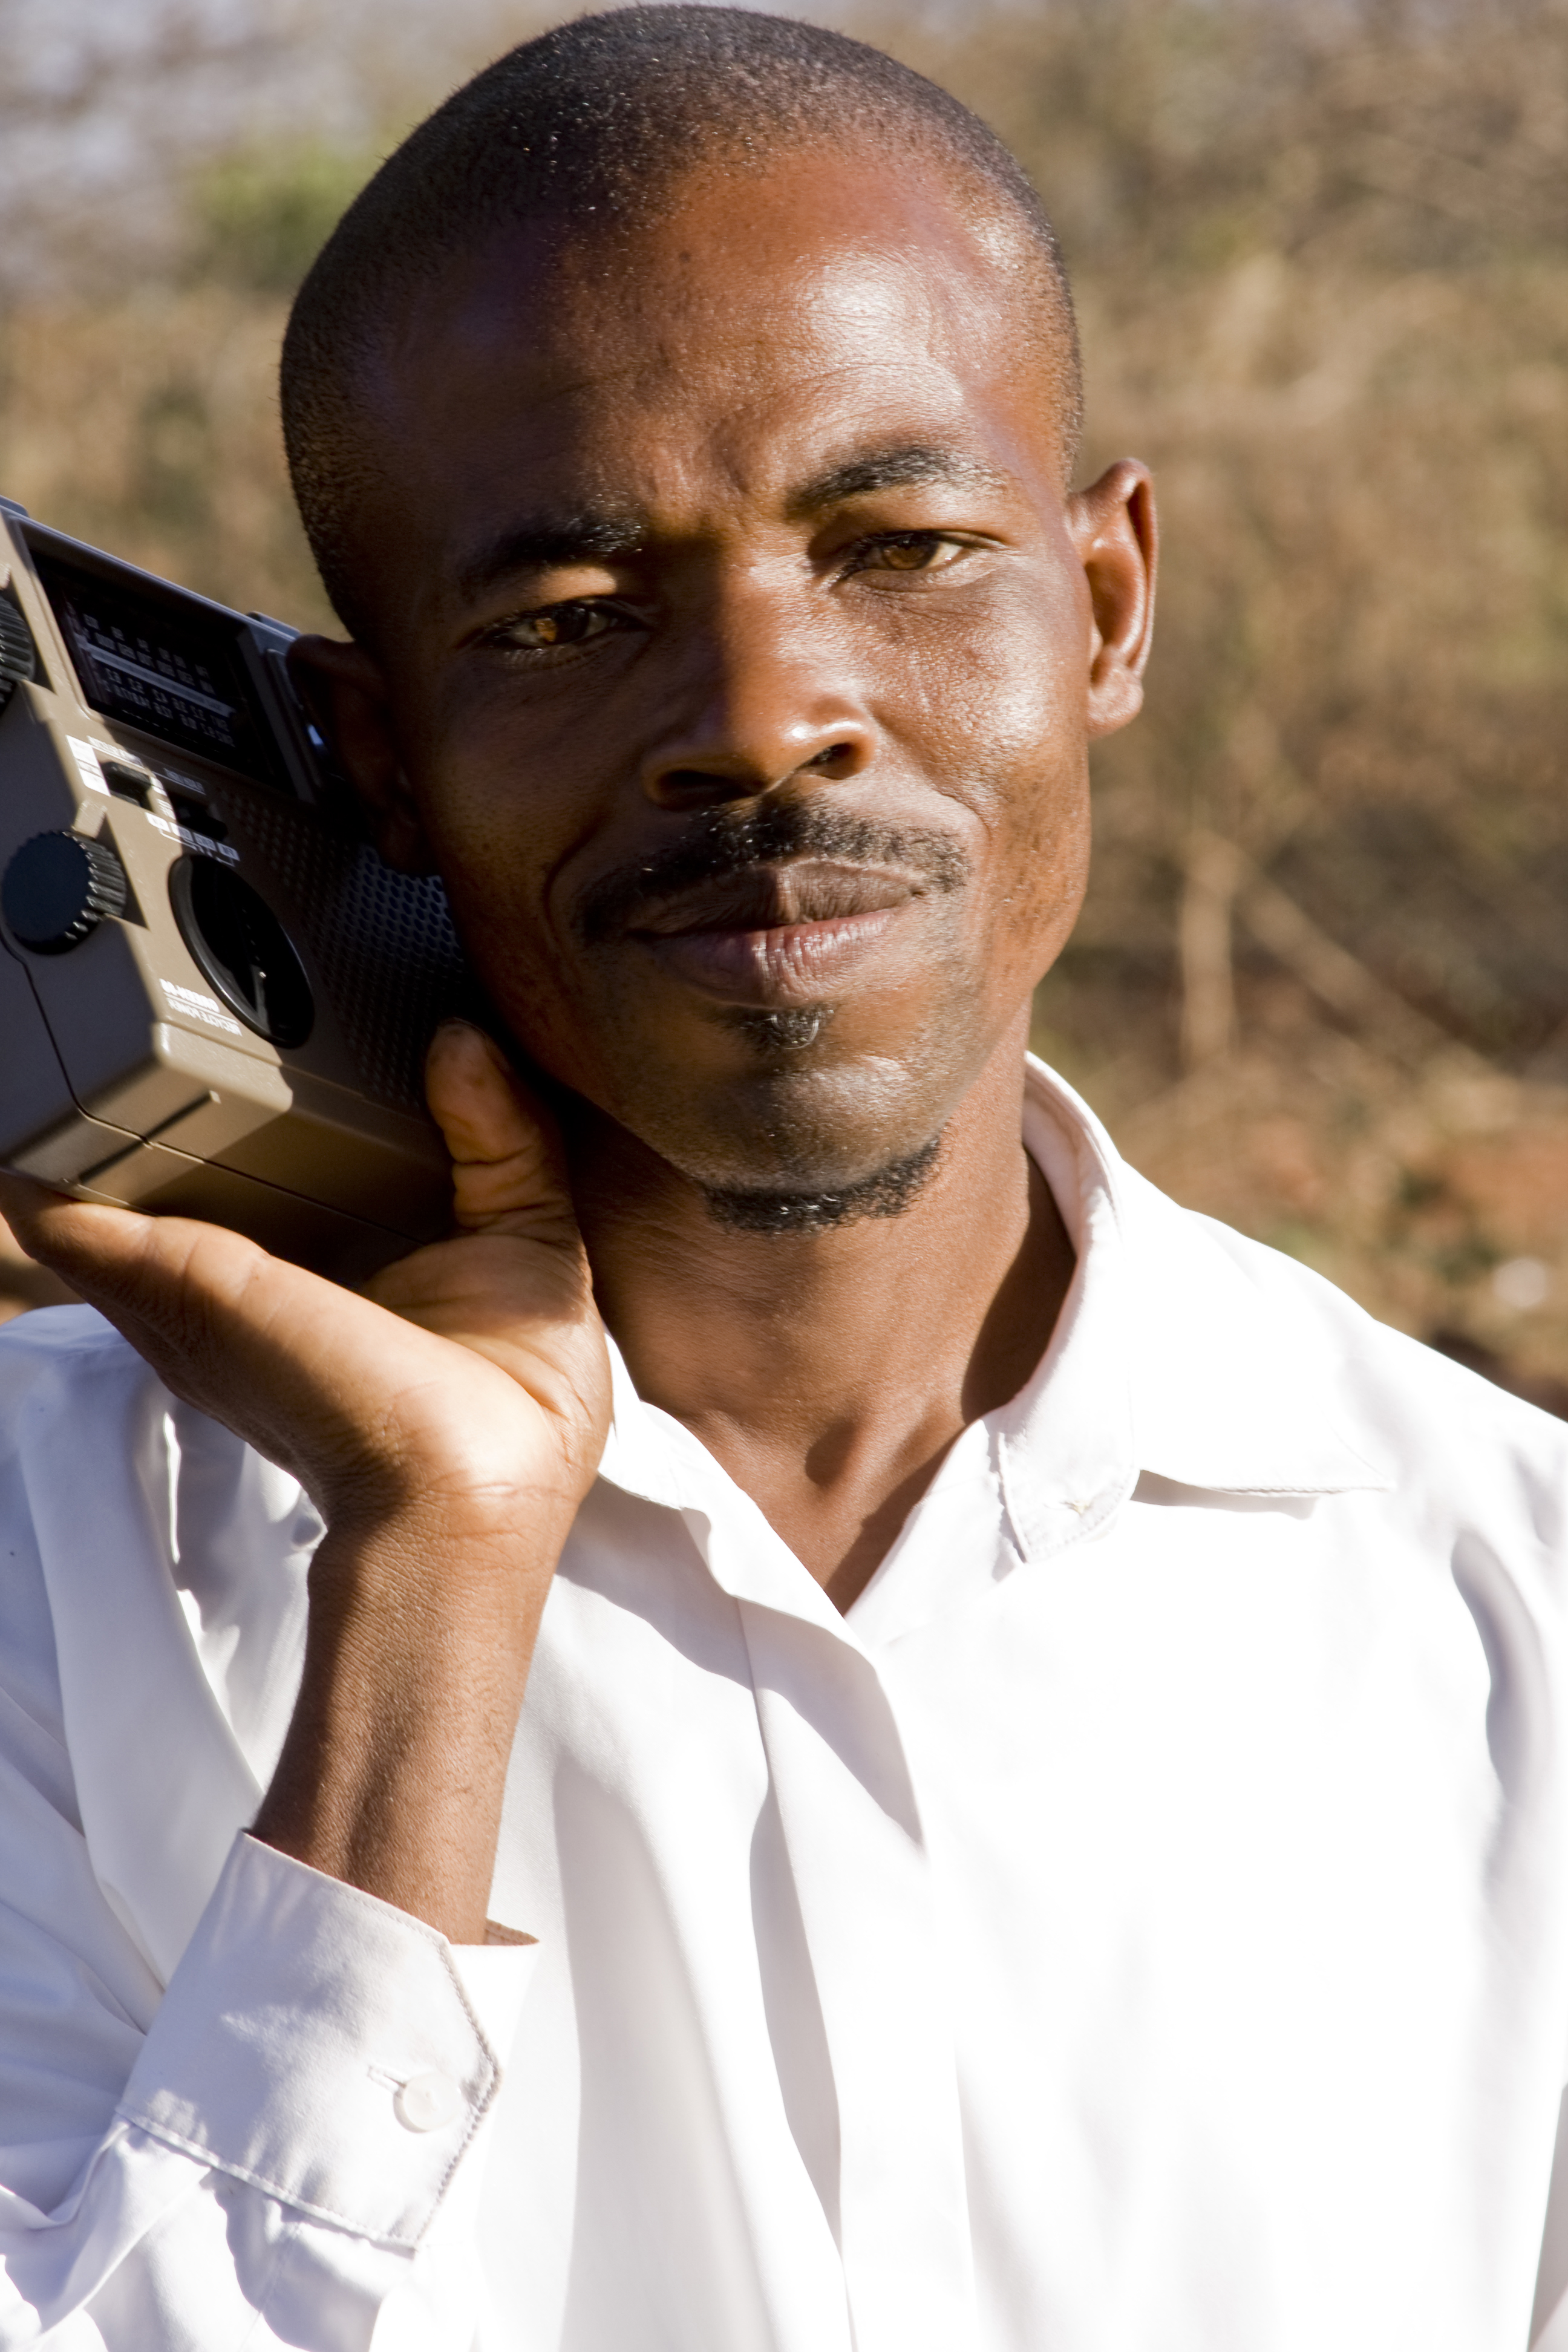 African man with radio